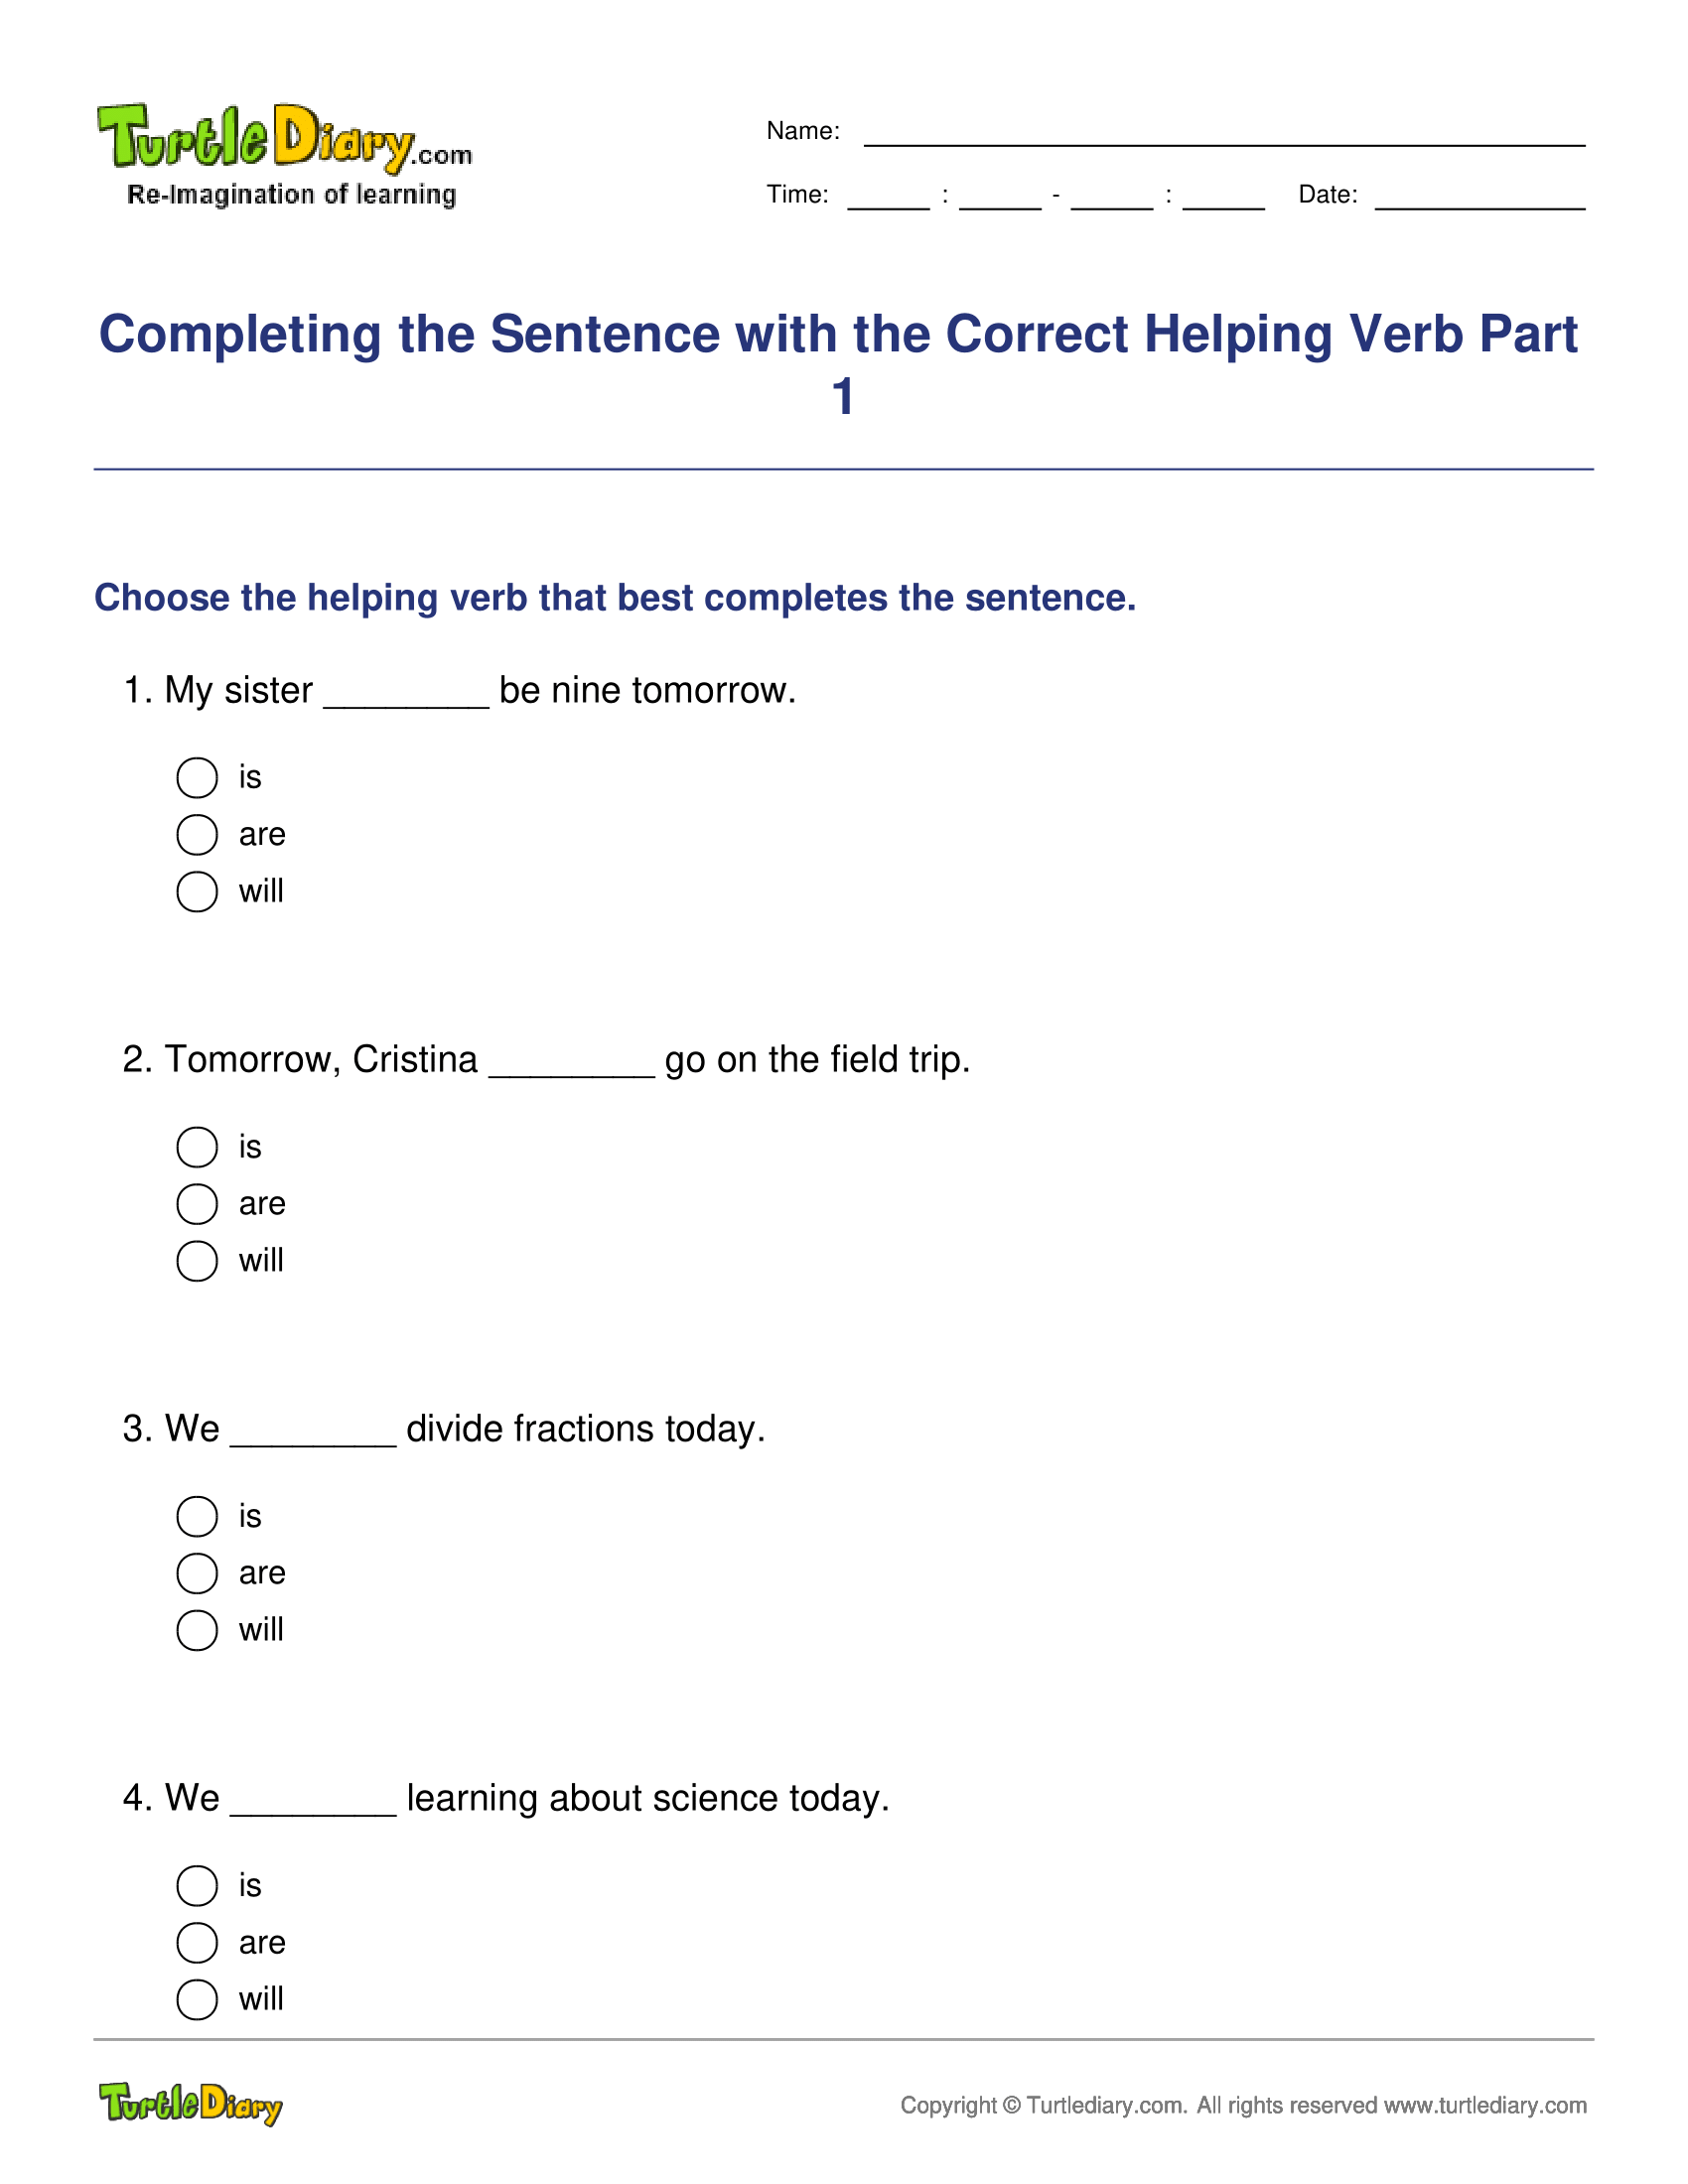 Completing the Sentence with the Correct Helping Verb Part 1